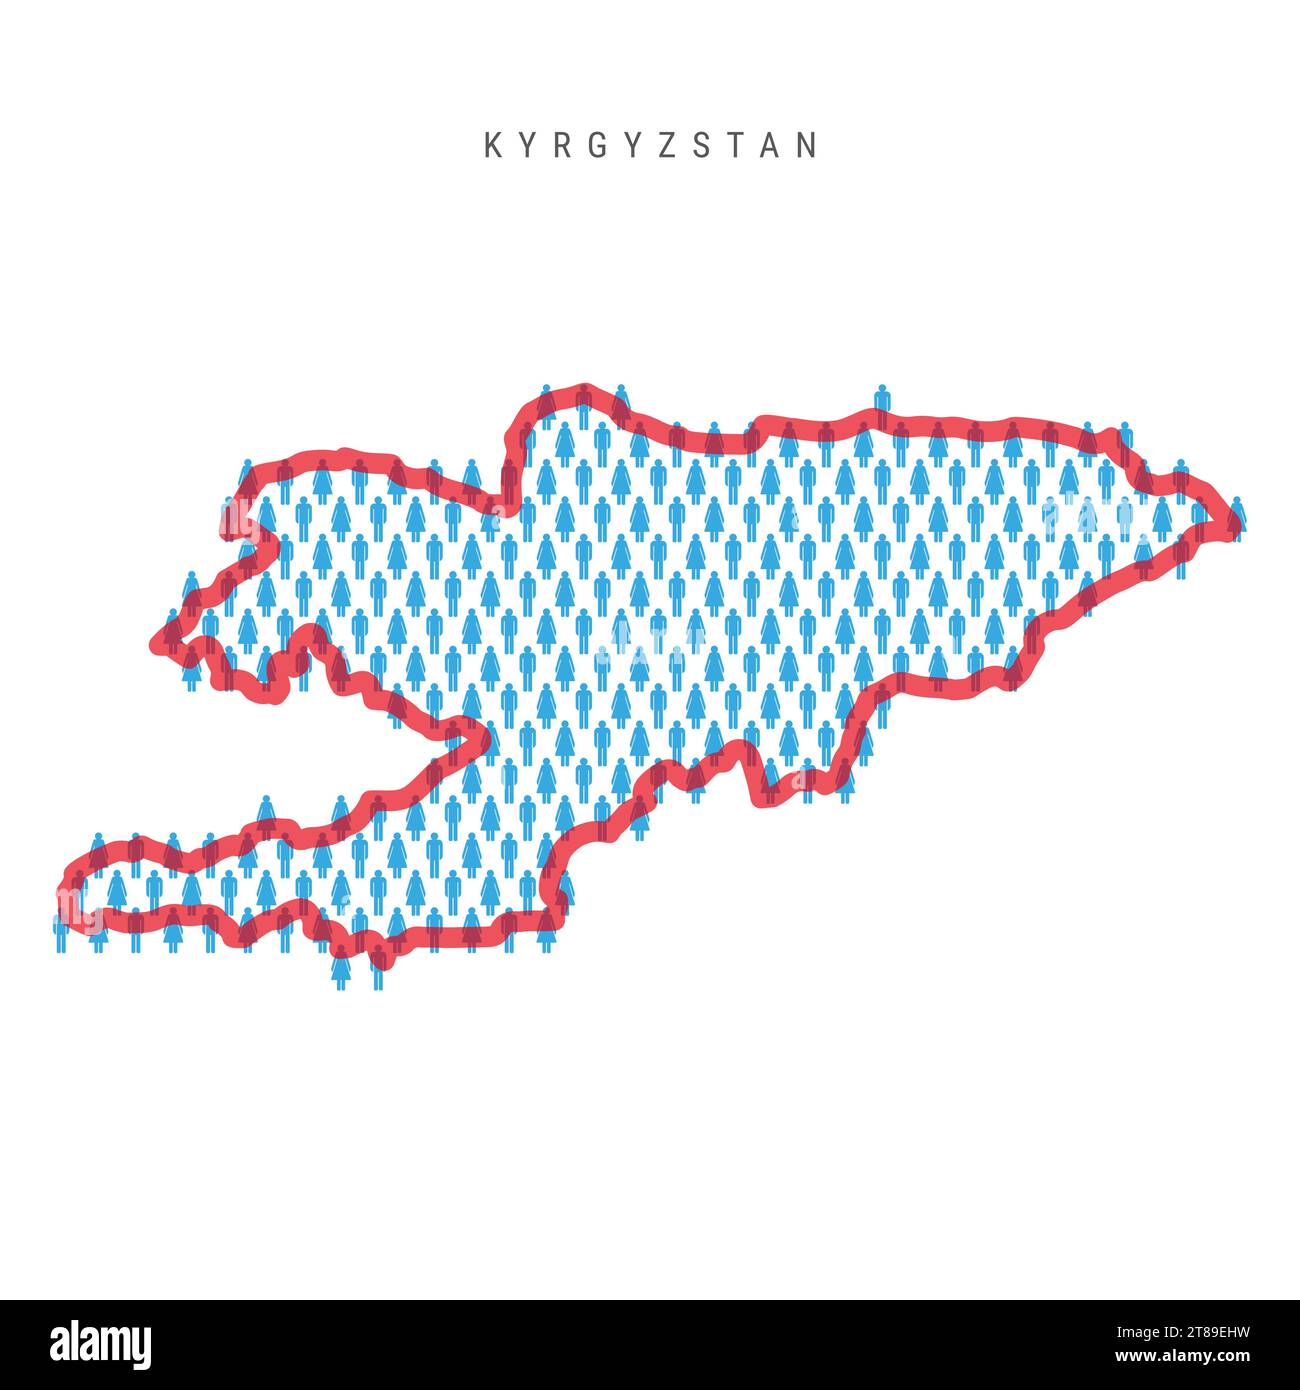 Kyrgyzstan population map. Stick figures Kyrgyz people map with bold red translucent country border. Pattern of men and women icons. Isolated vector i Stock Vector